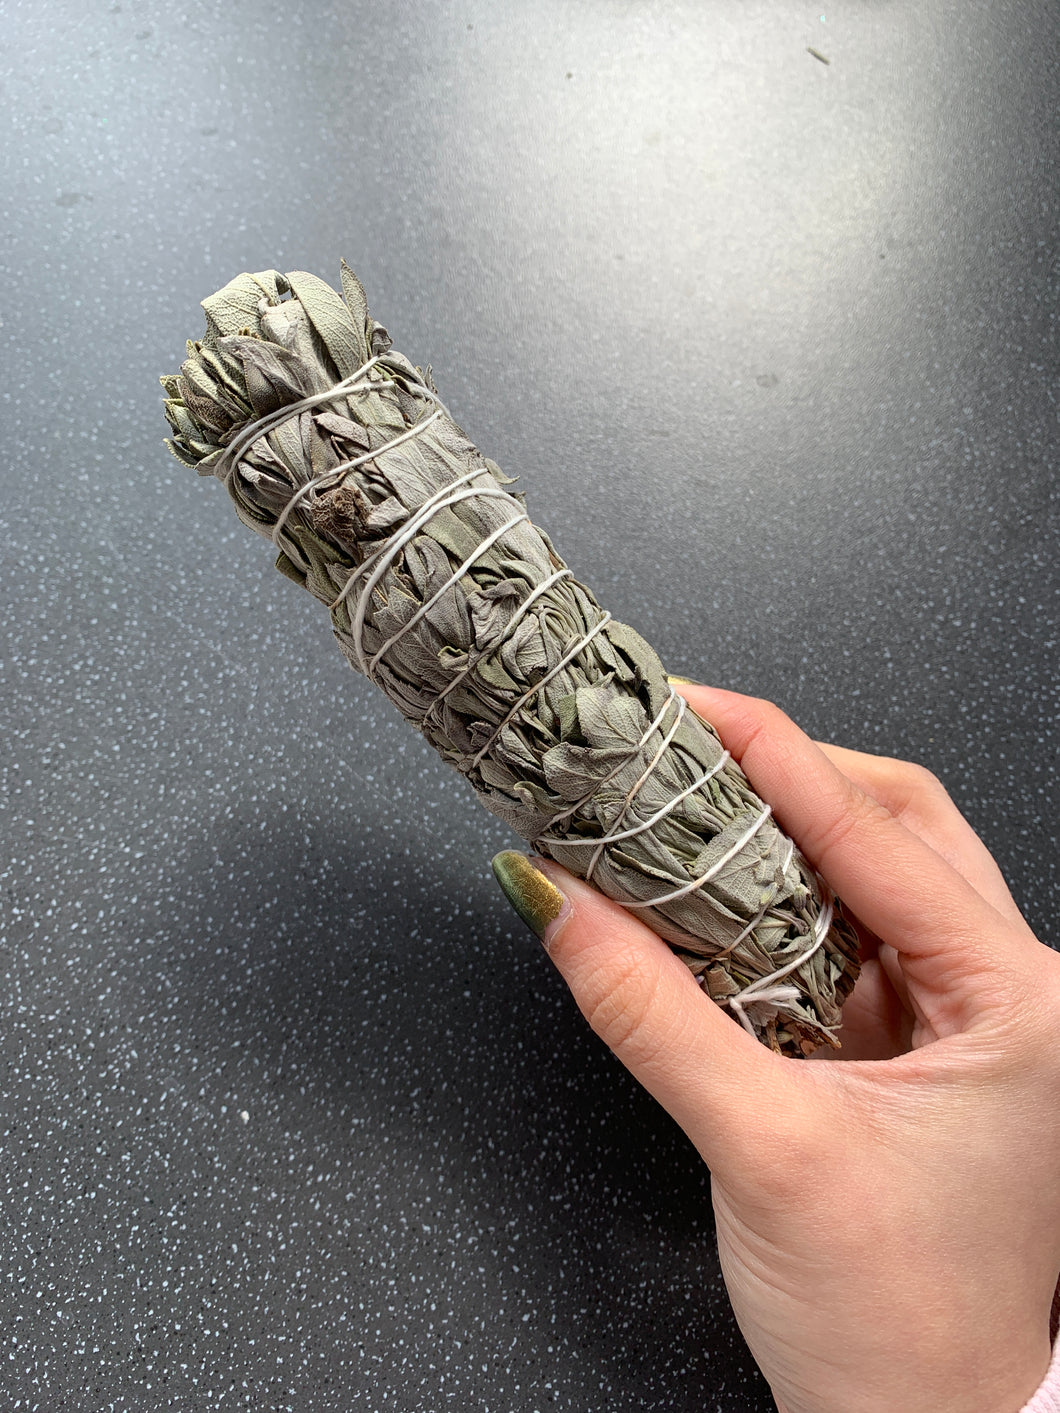 Sage Smudge Stick for Cleansing For Happiness, Warding Off Negativity, Good Health, Grounding, Protection for You & Your Space